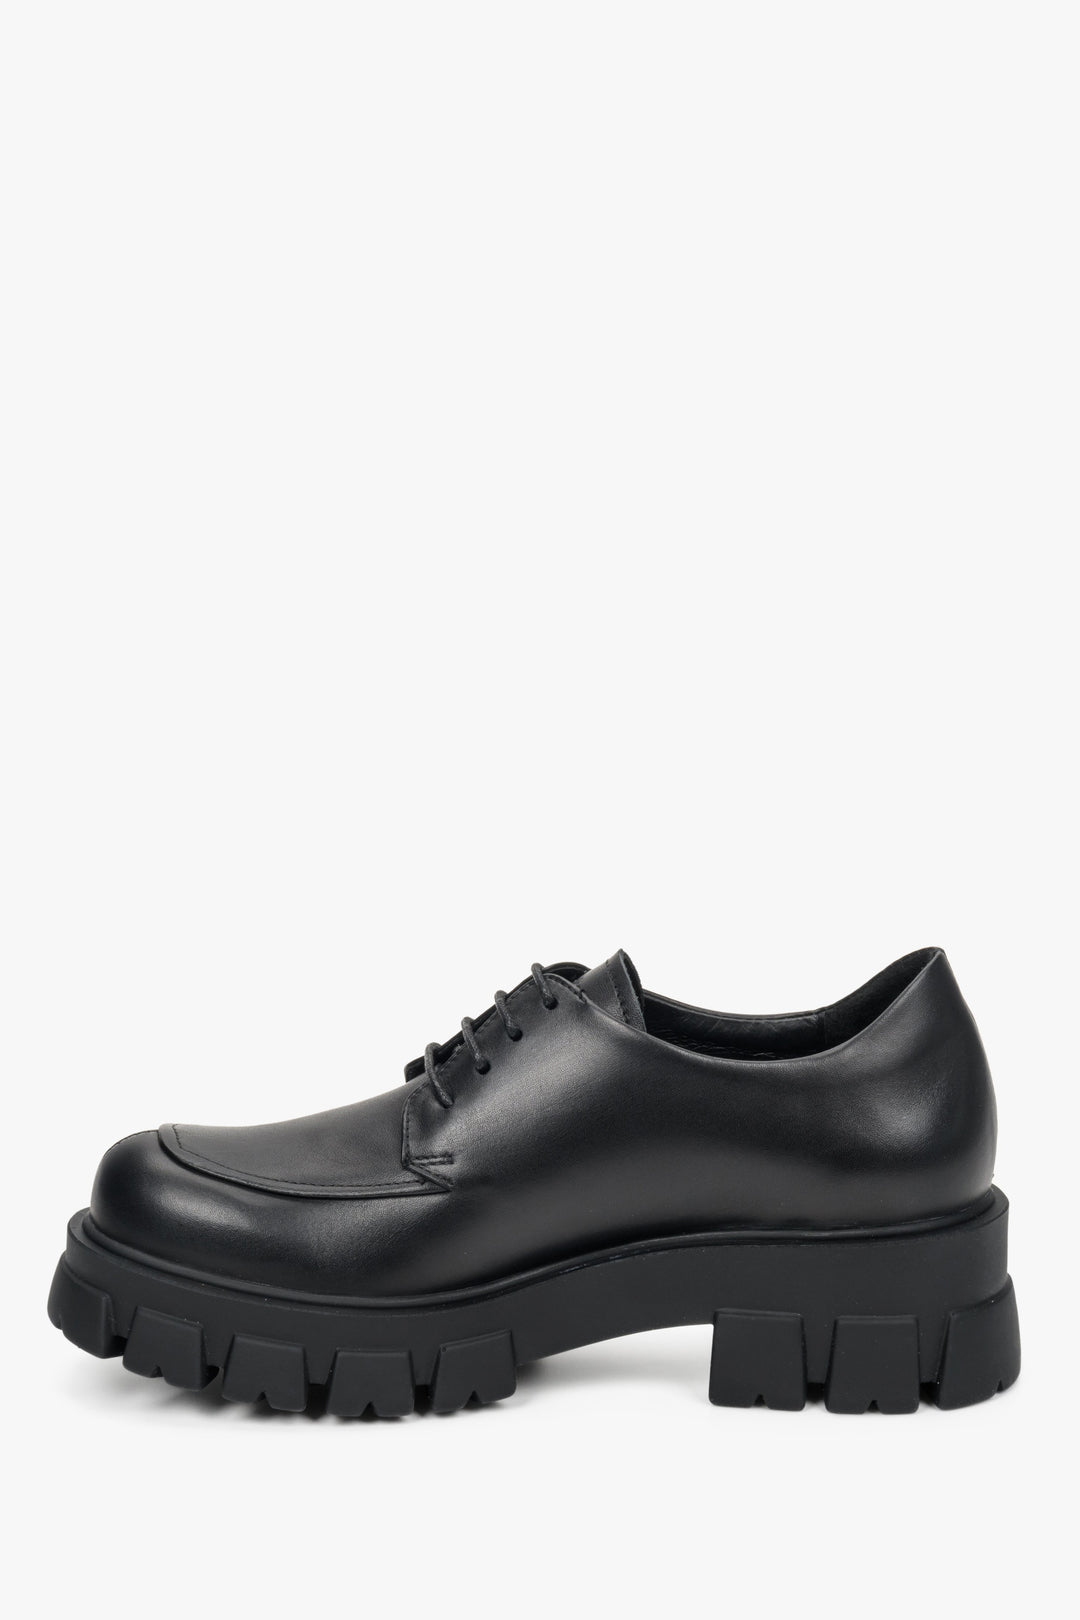 Women's black lace-up brogues made of genuine leather - shoe profile.